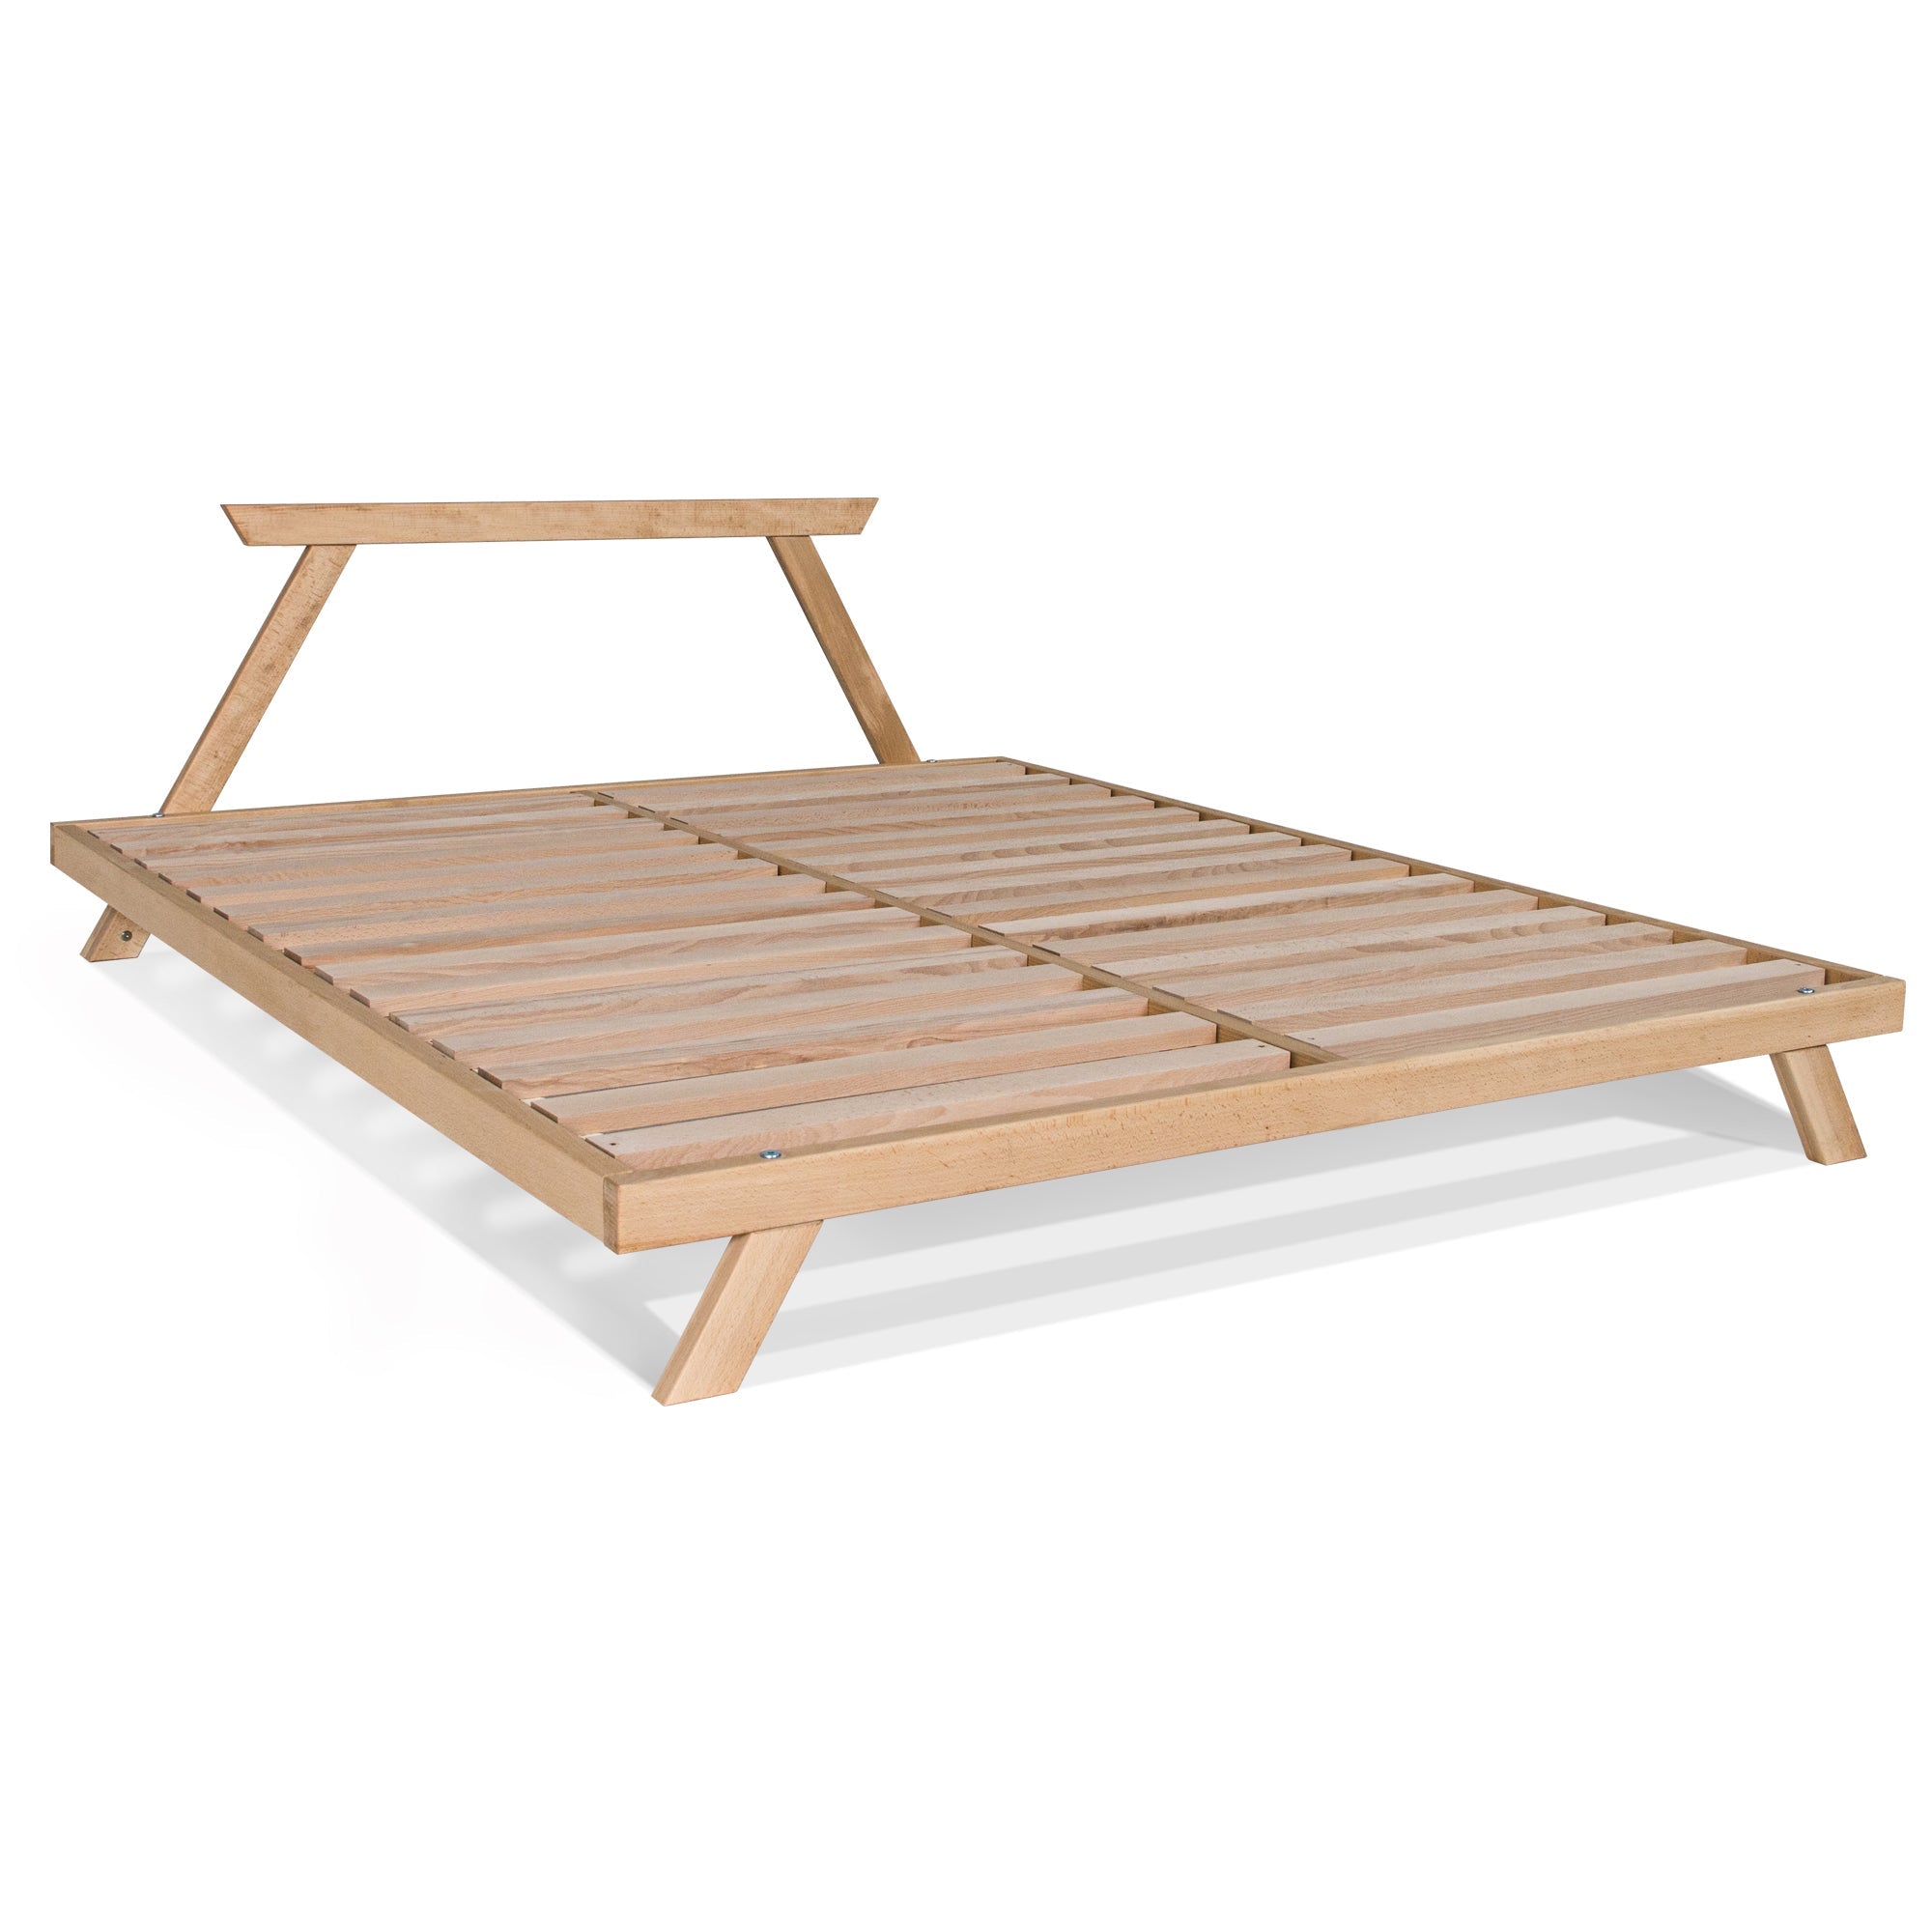 ALLEGRO Double Bed, Beech Wood natural frame without mattress